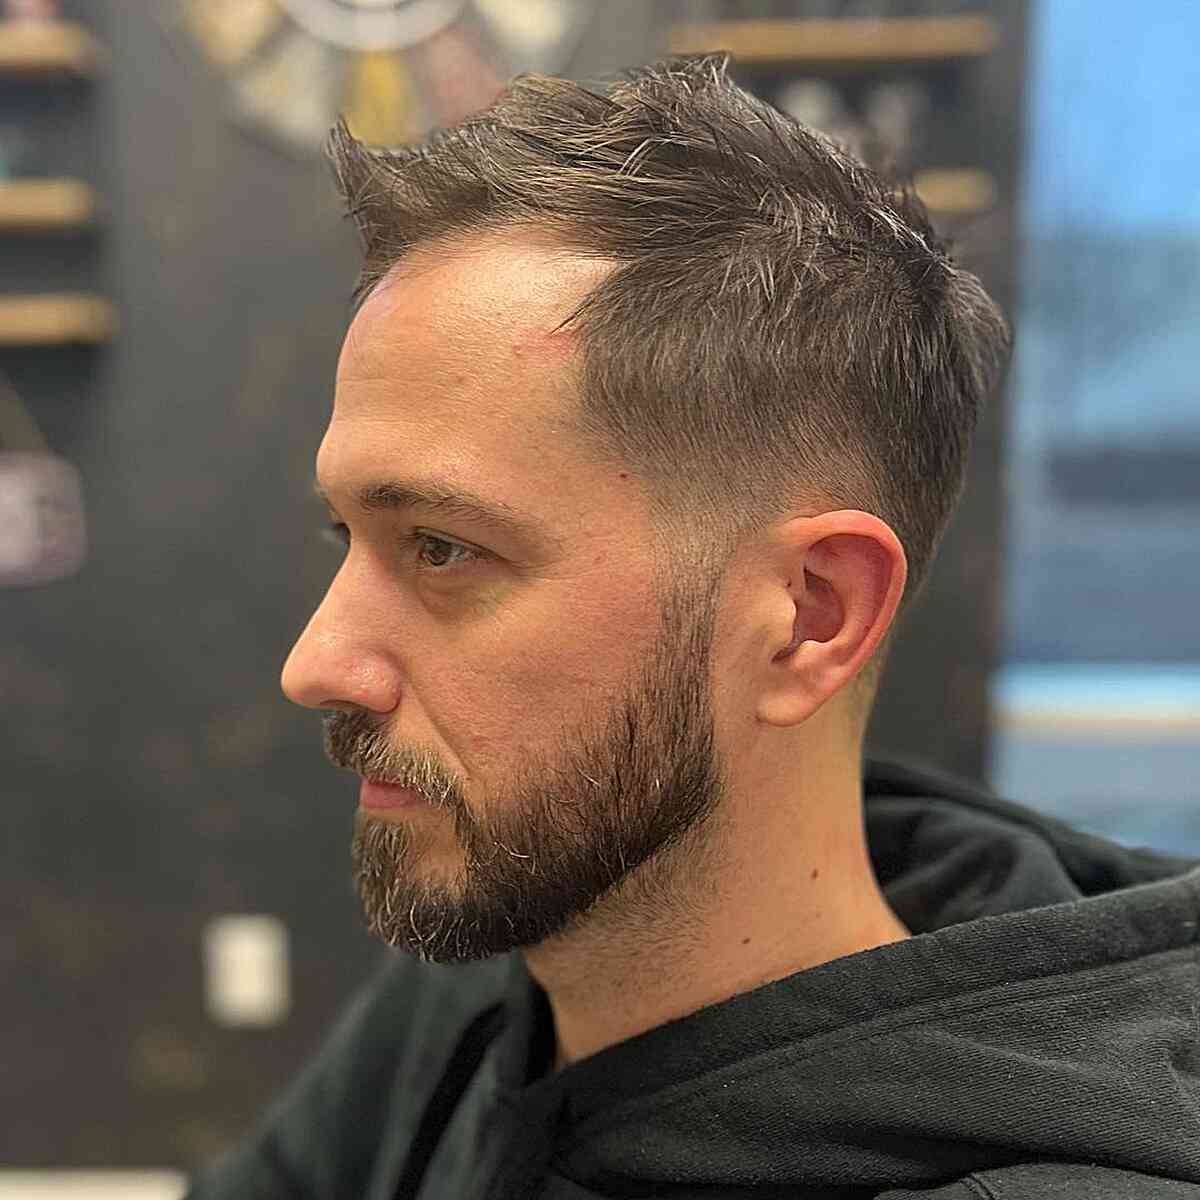 Tousled Top with Faded Sides for Men with Thin Hair